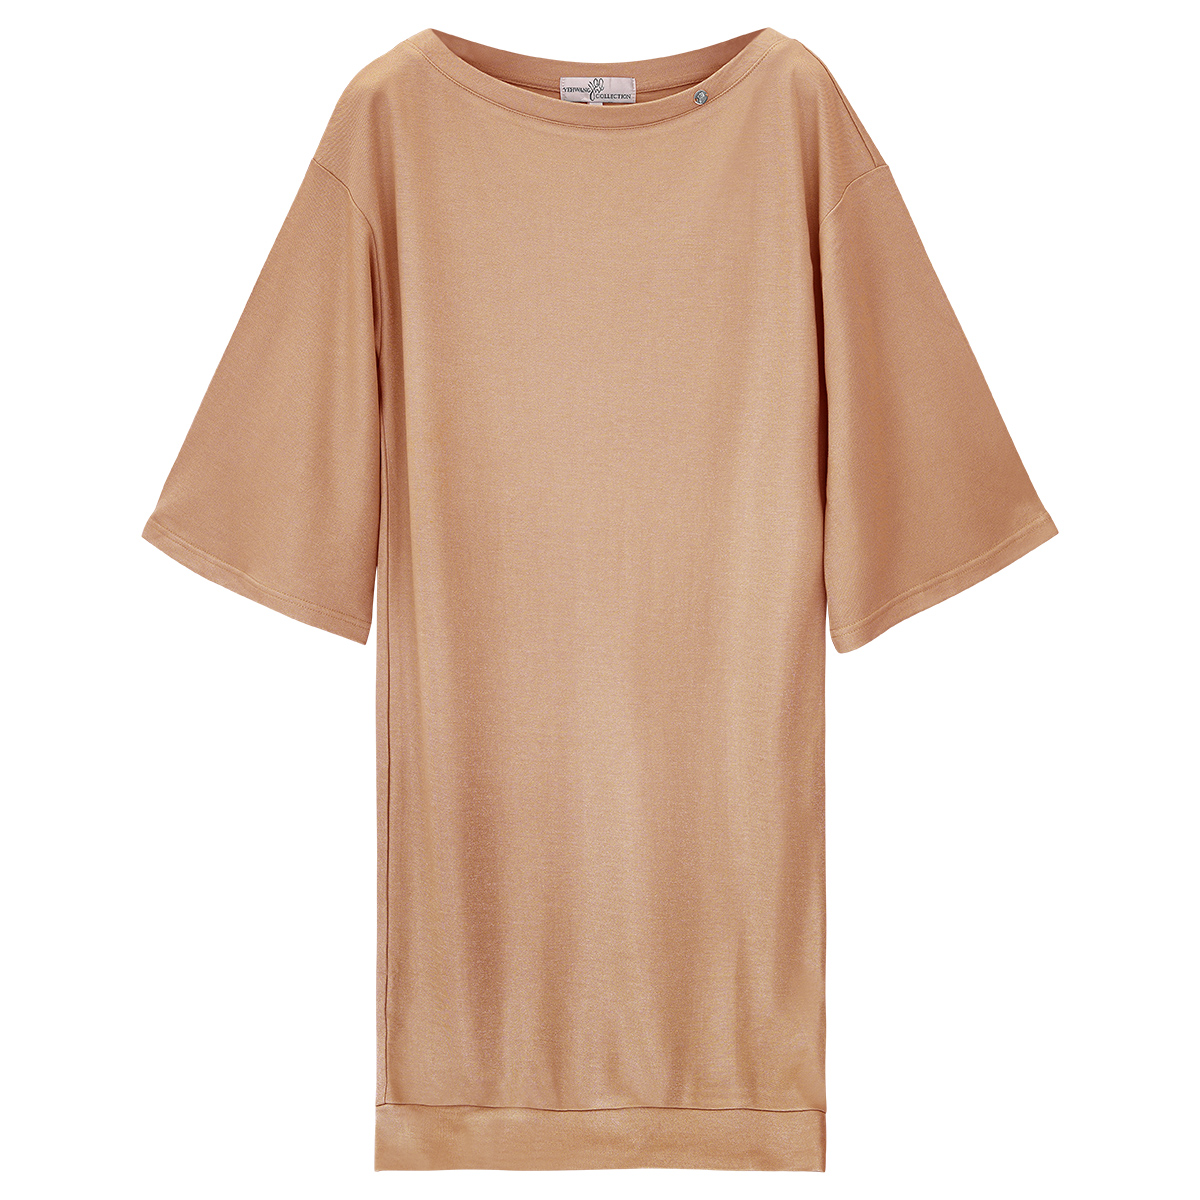 T-shirt dress with shimmer coating